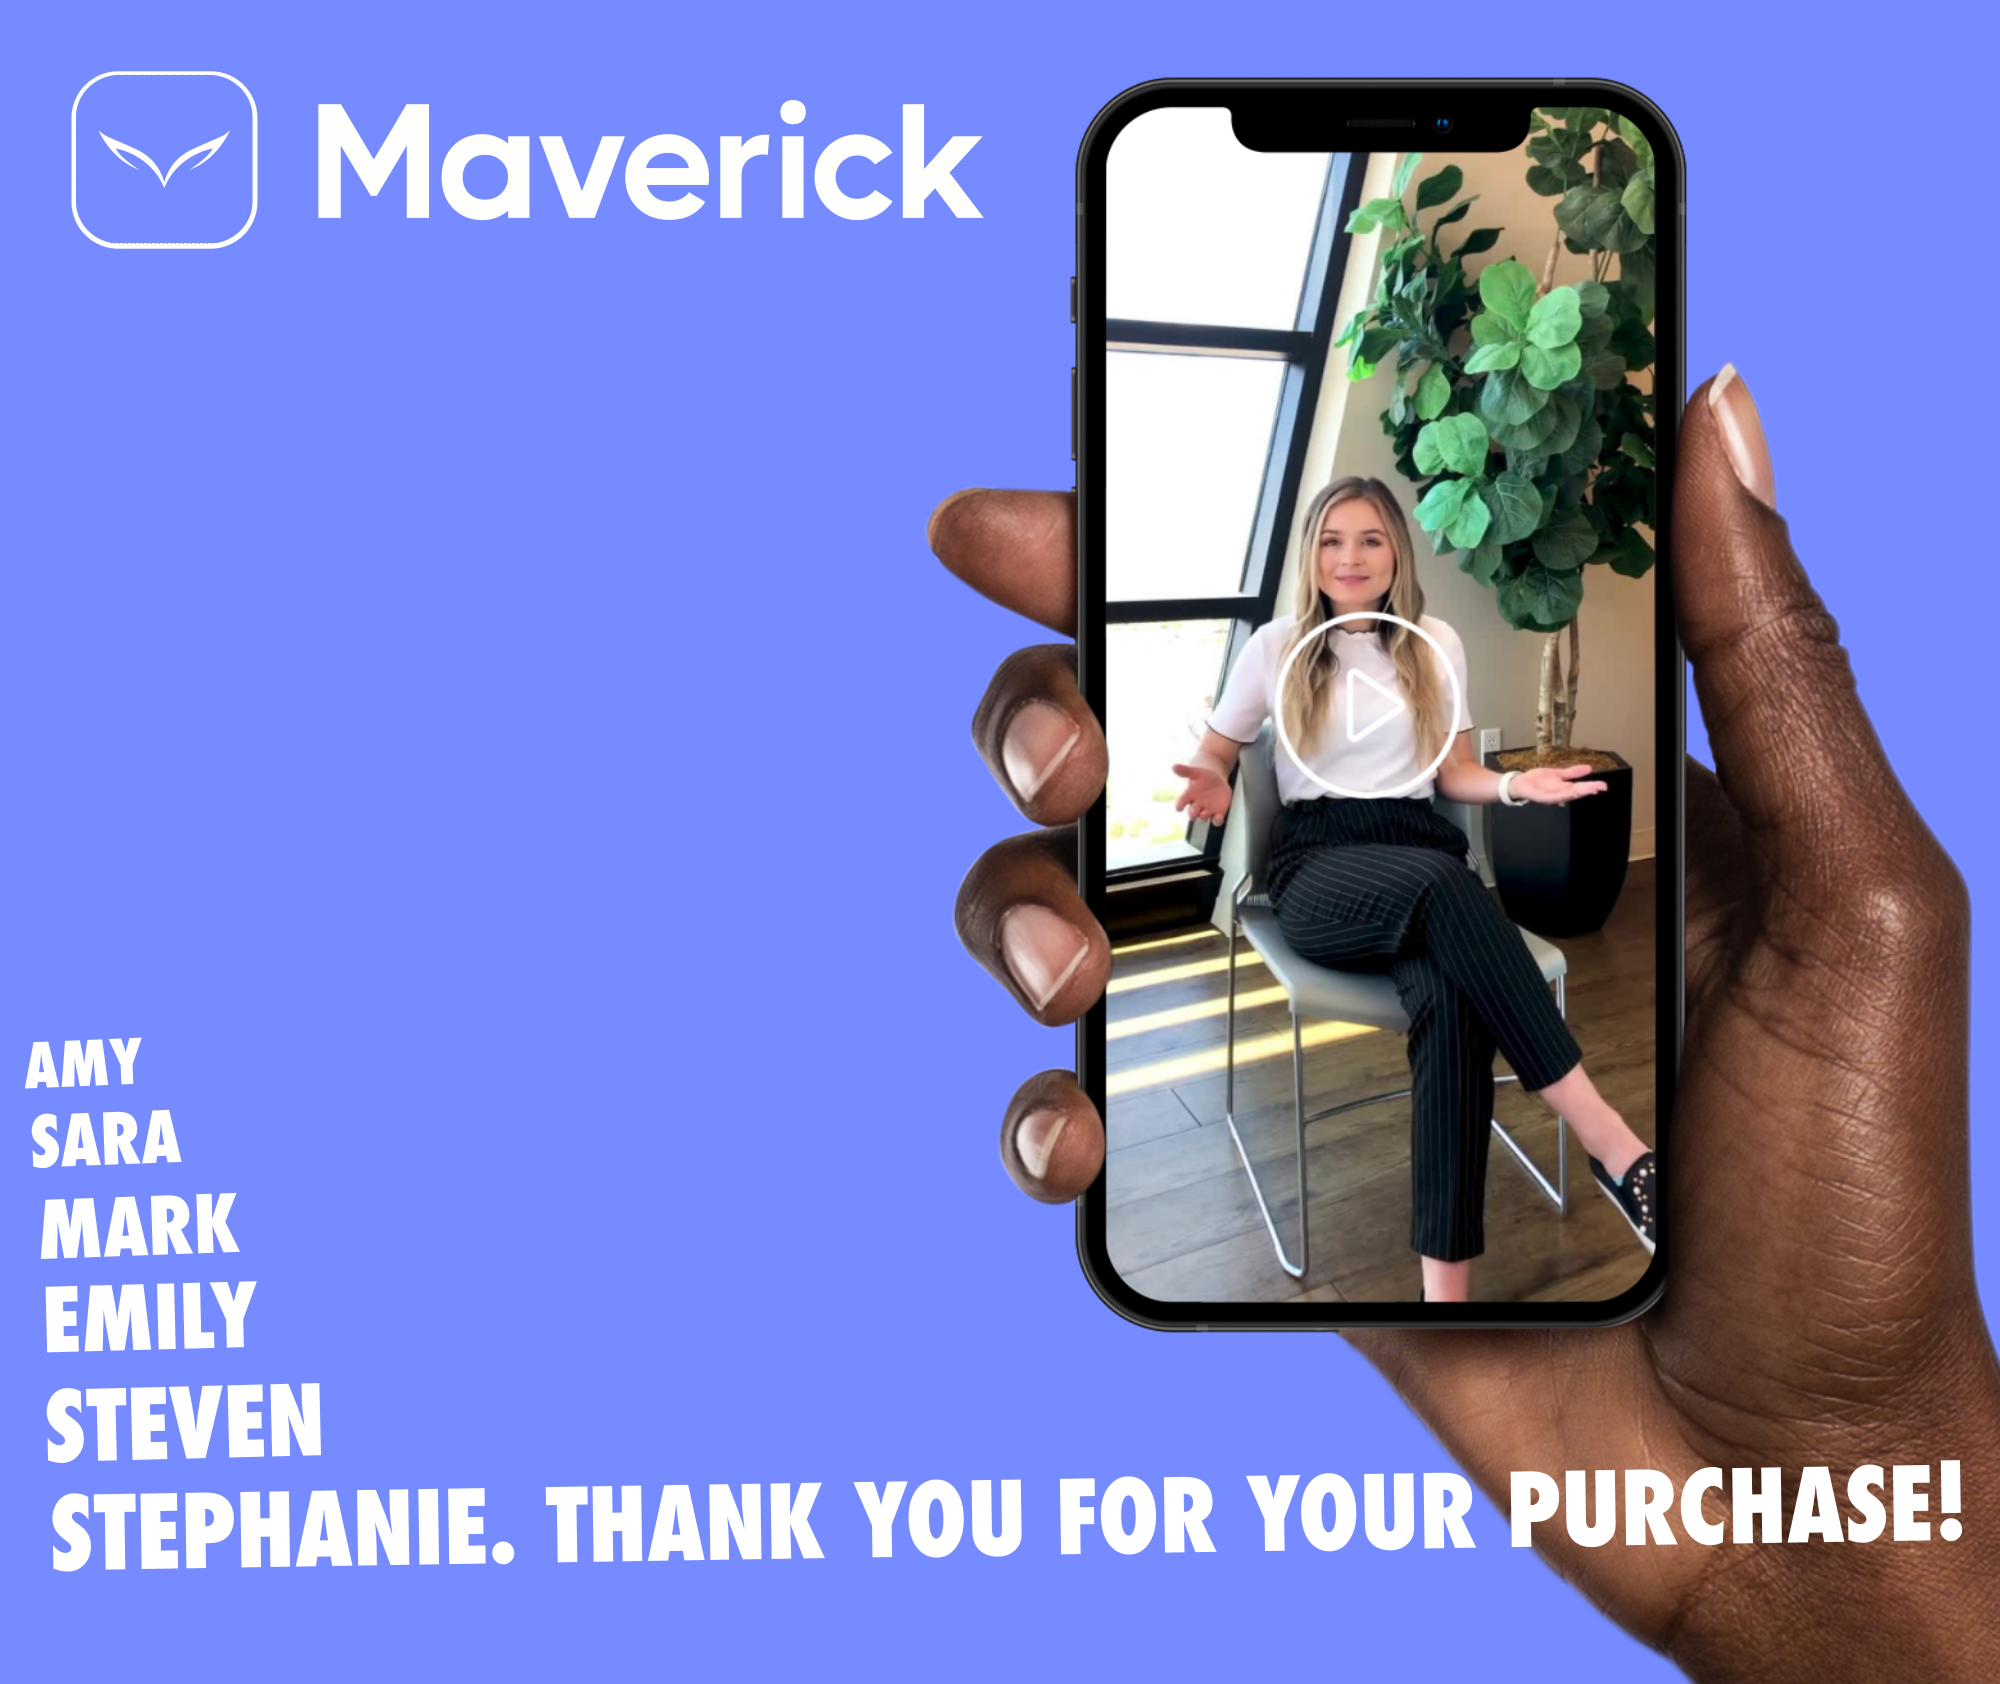 Maverick - Ecommerce tool to create personalized video messages